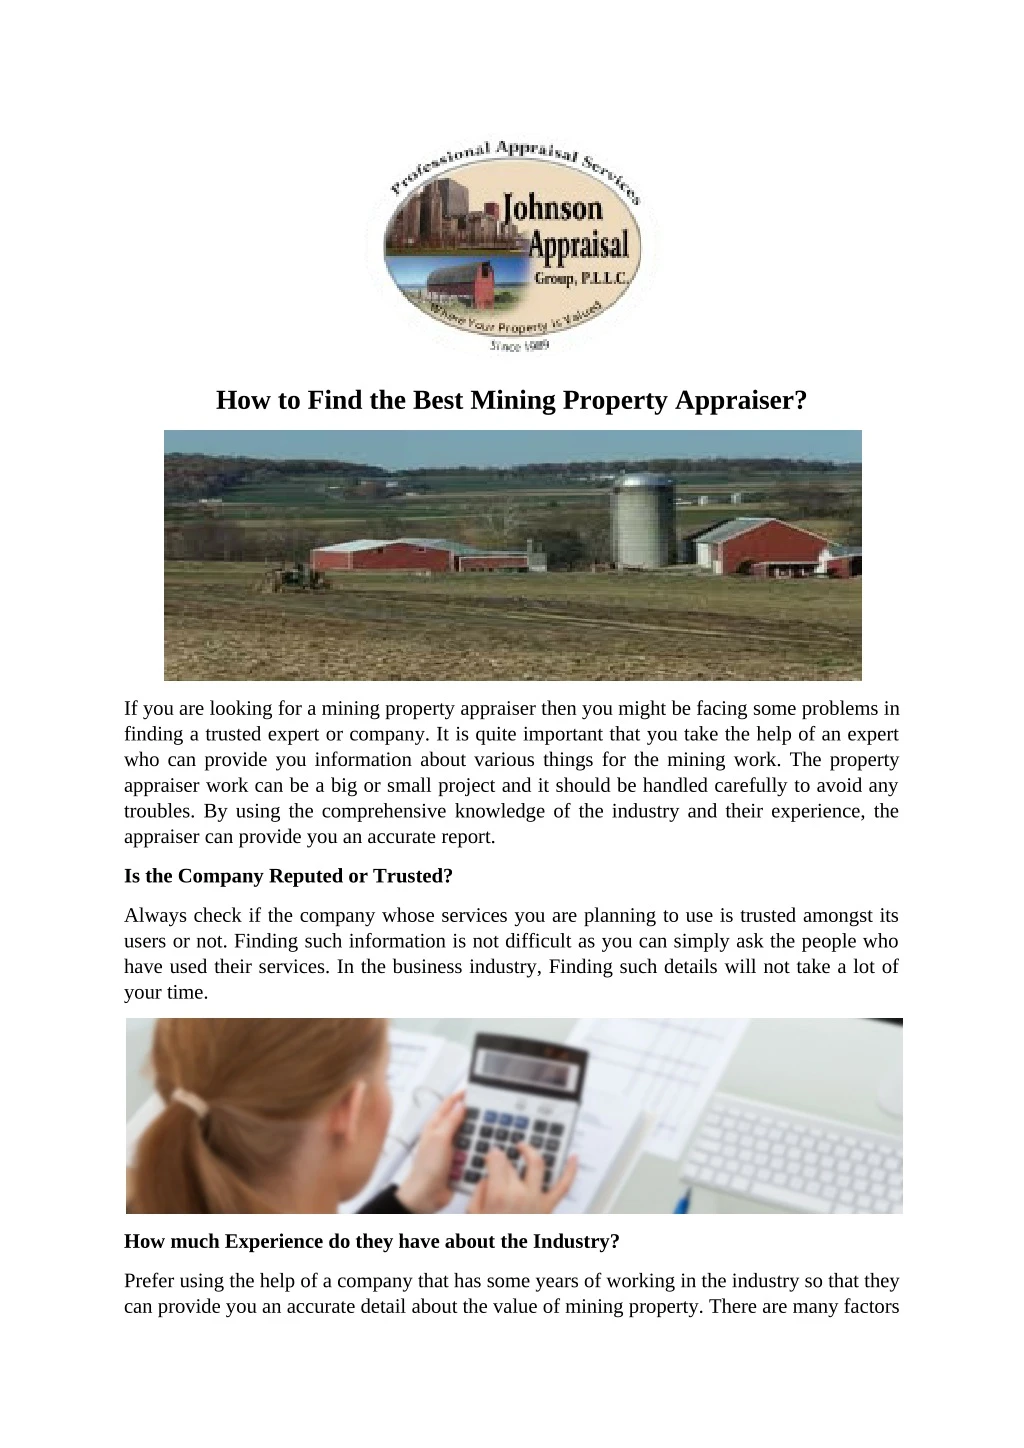 how to find the best mining property appraiser